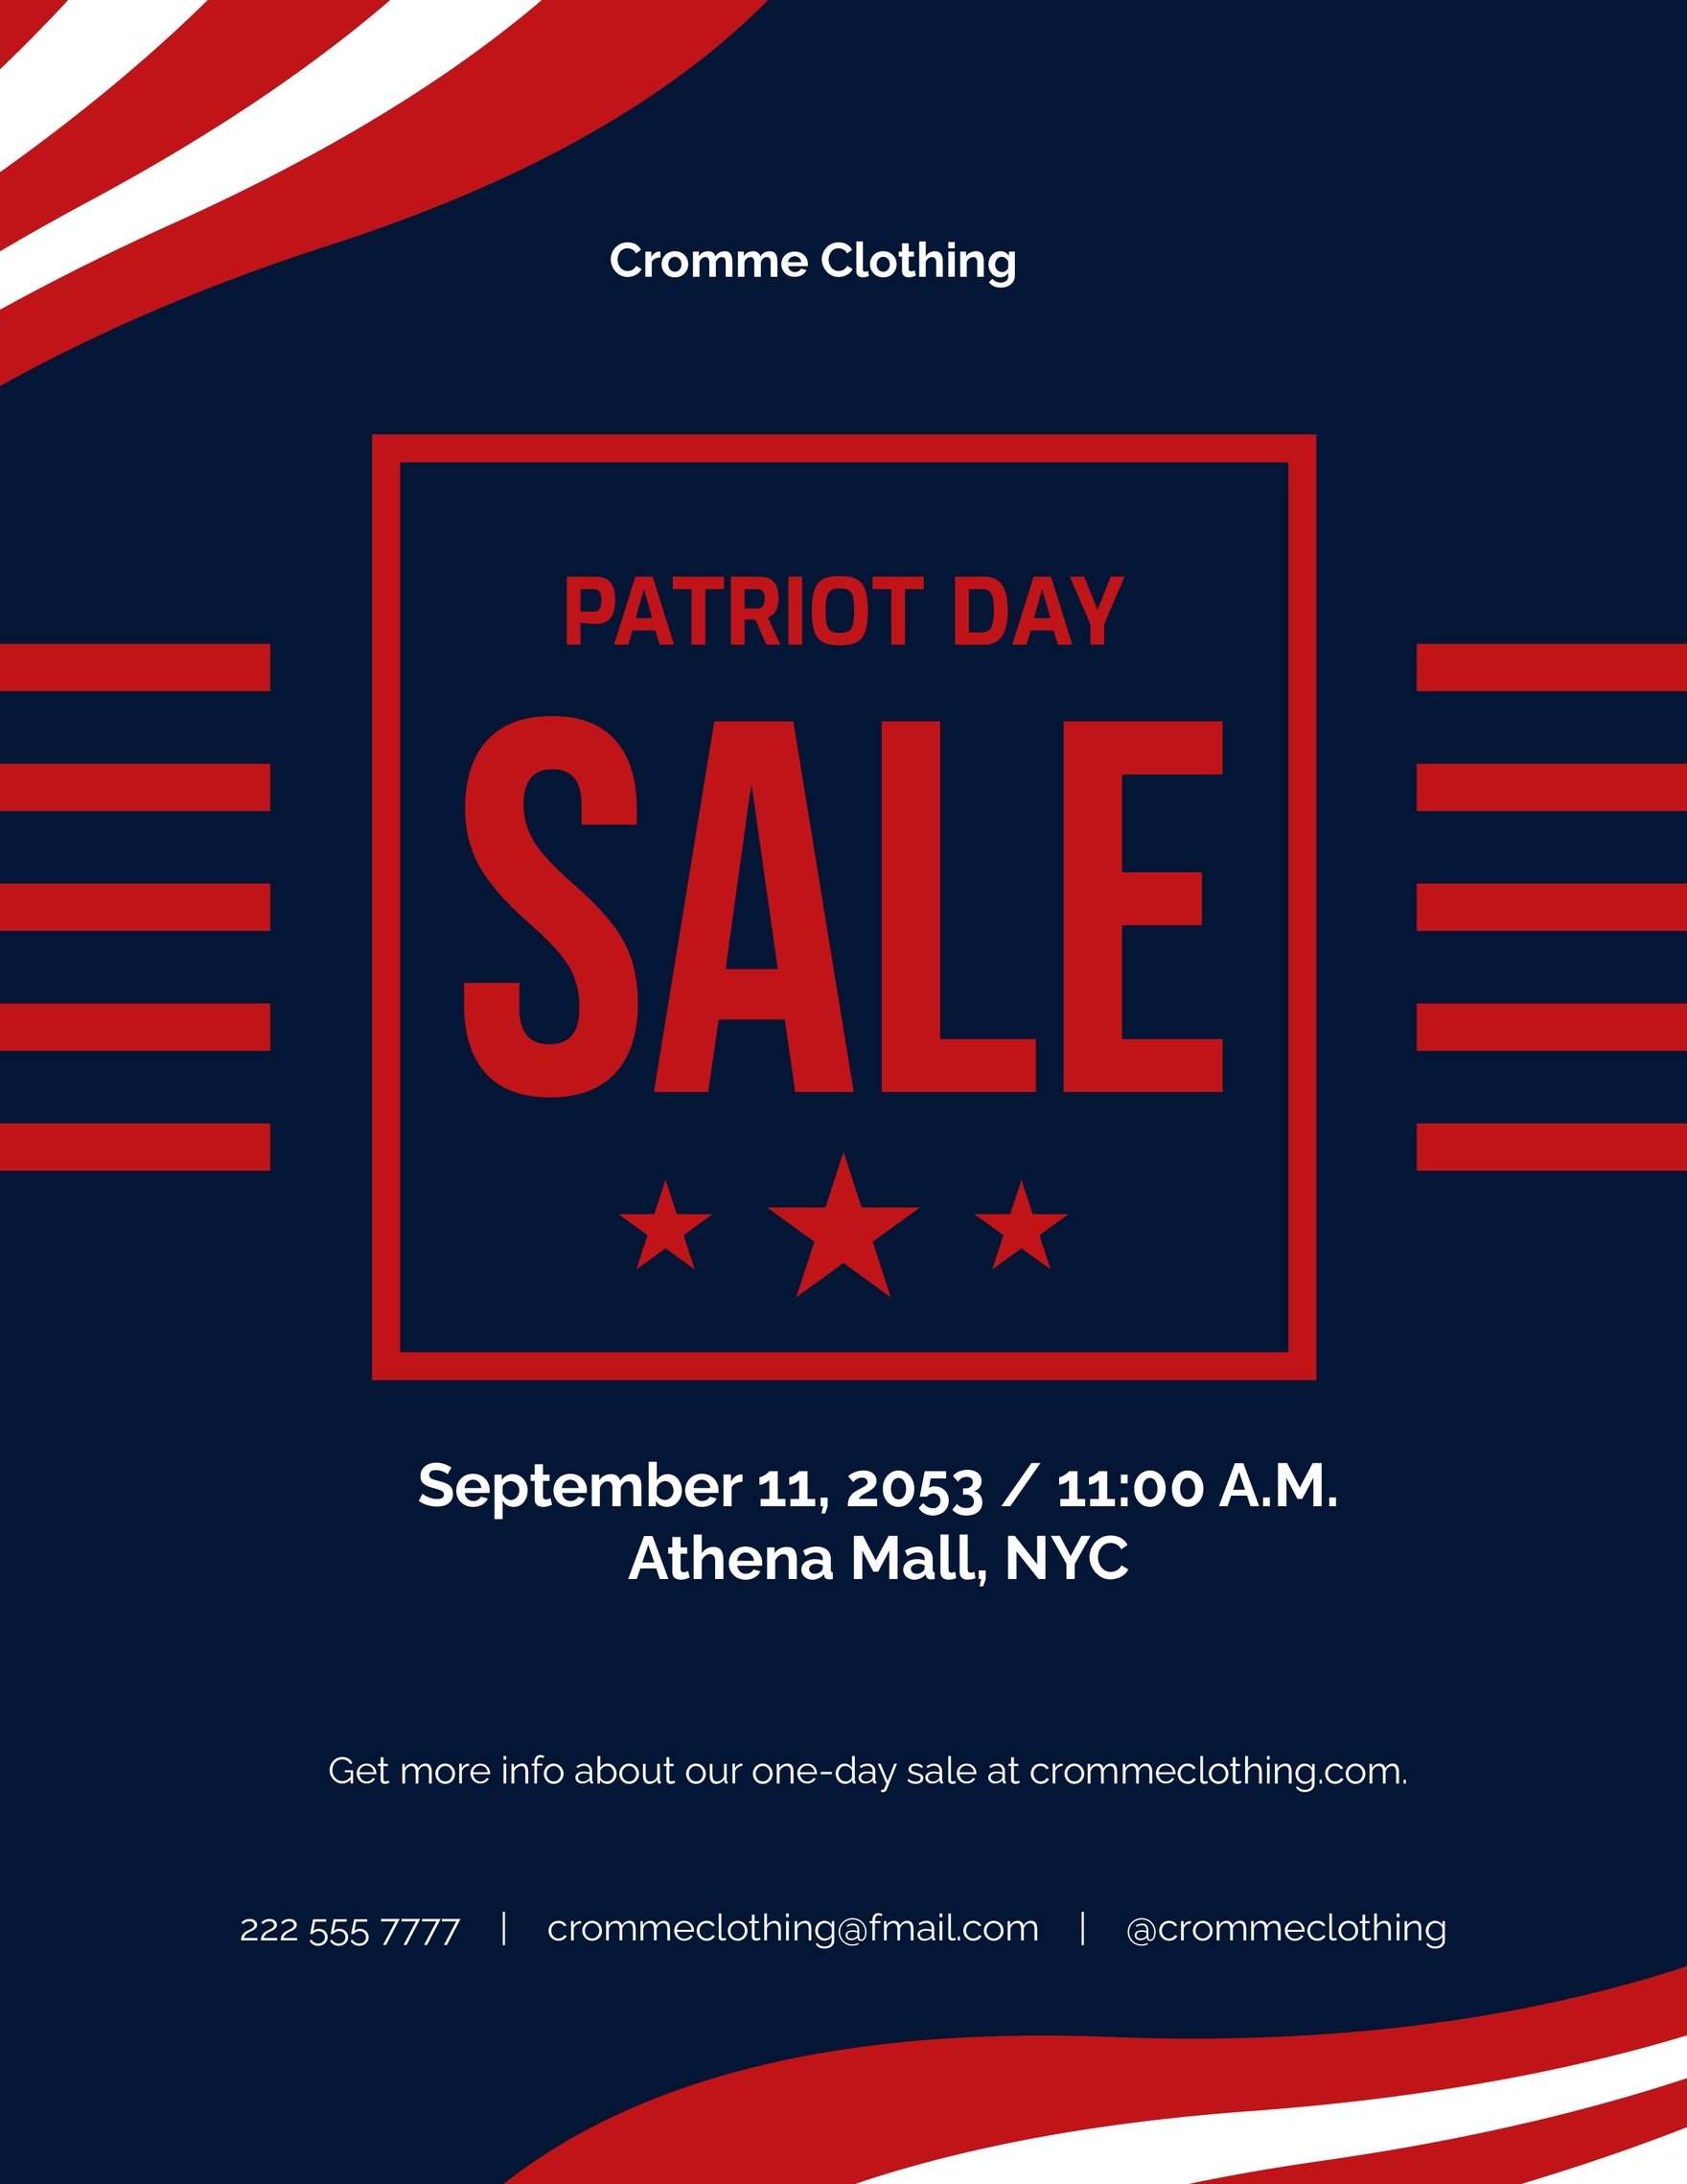 Patriot Day Sale Flyer in Word, Google Docs, Illustrator, PSD, Apple Pages, Publisher